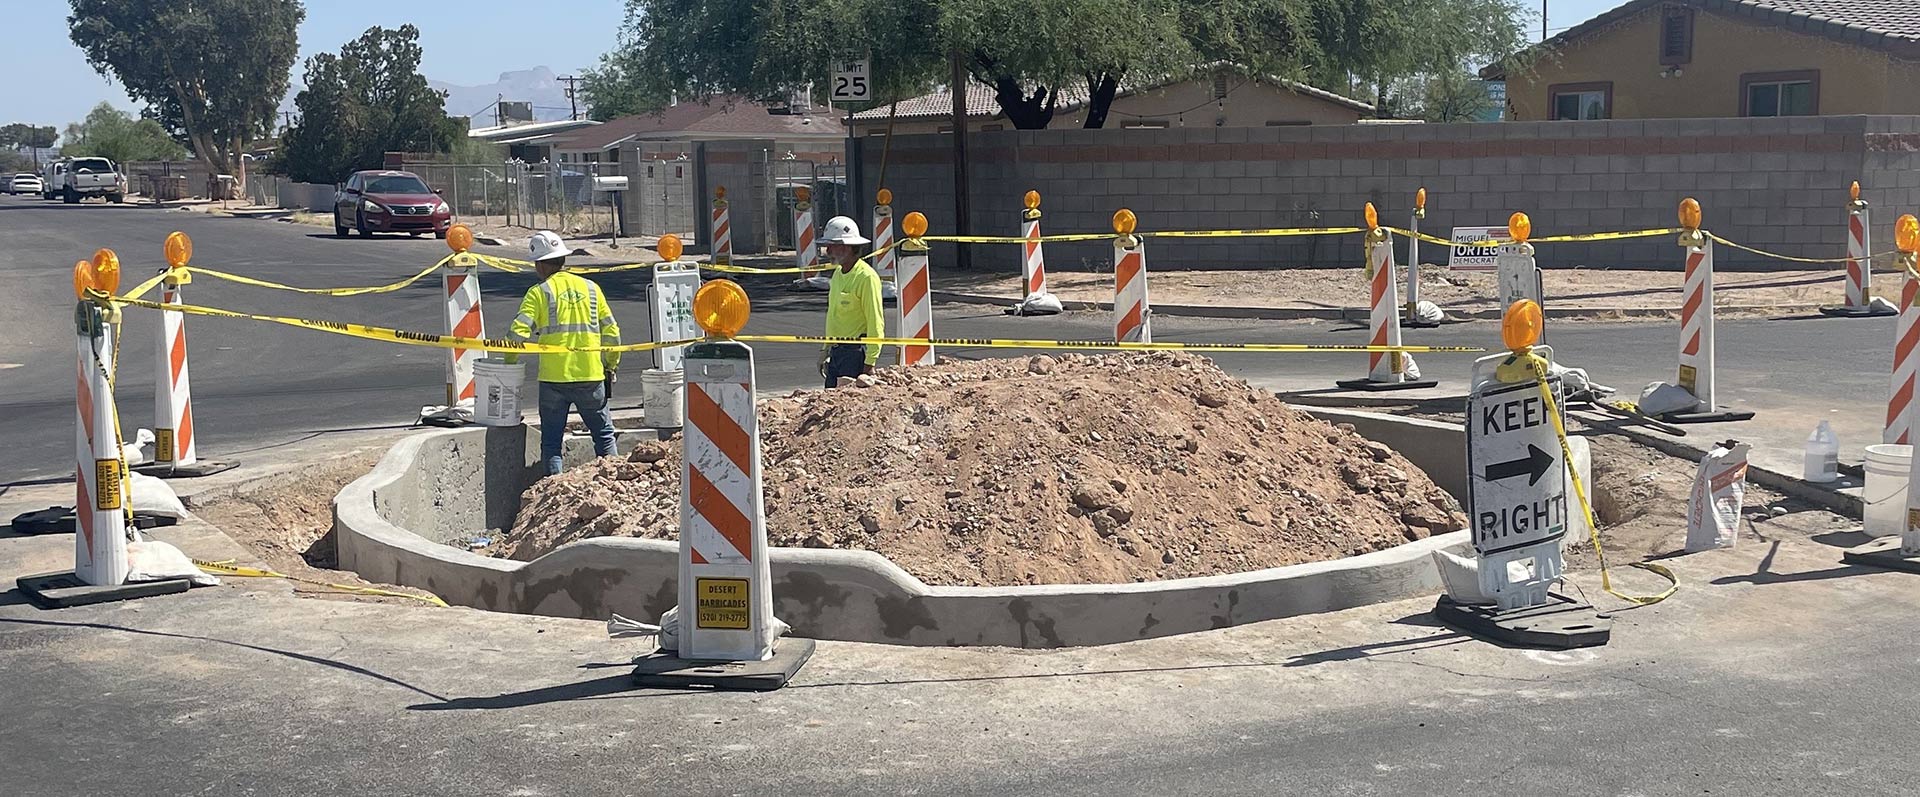 Tucson Clean and Beautiful Traffic Circle construction